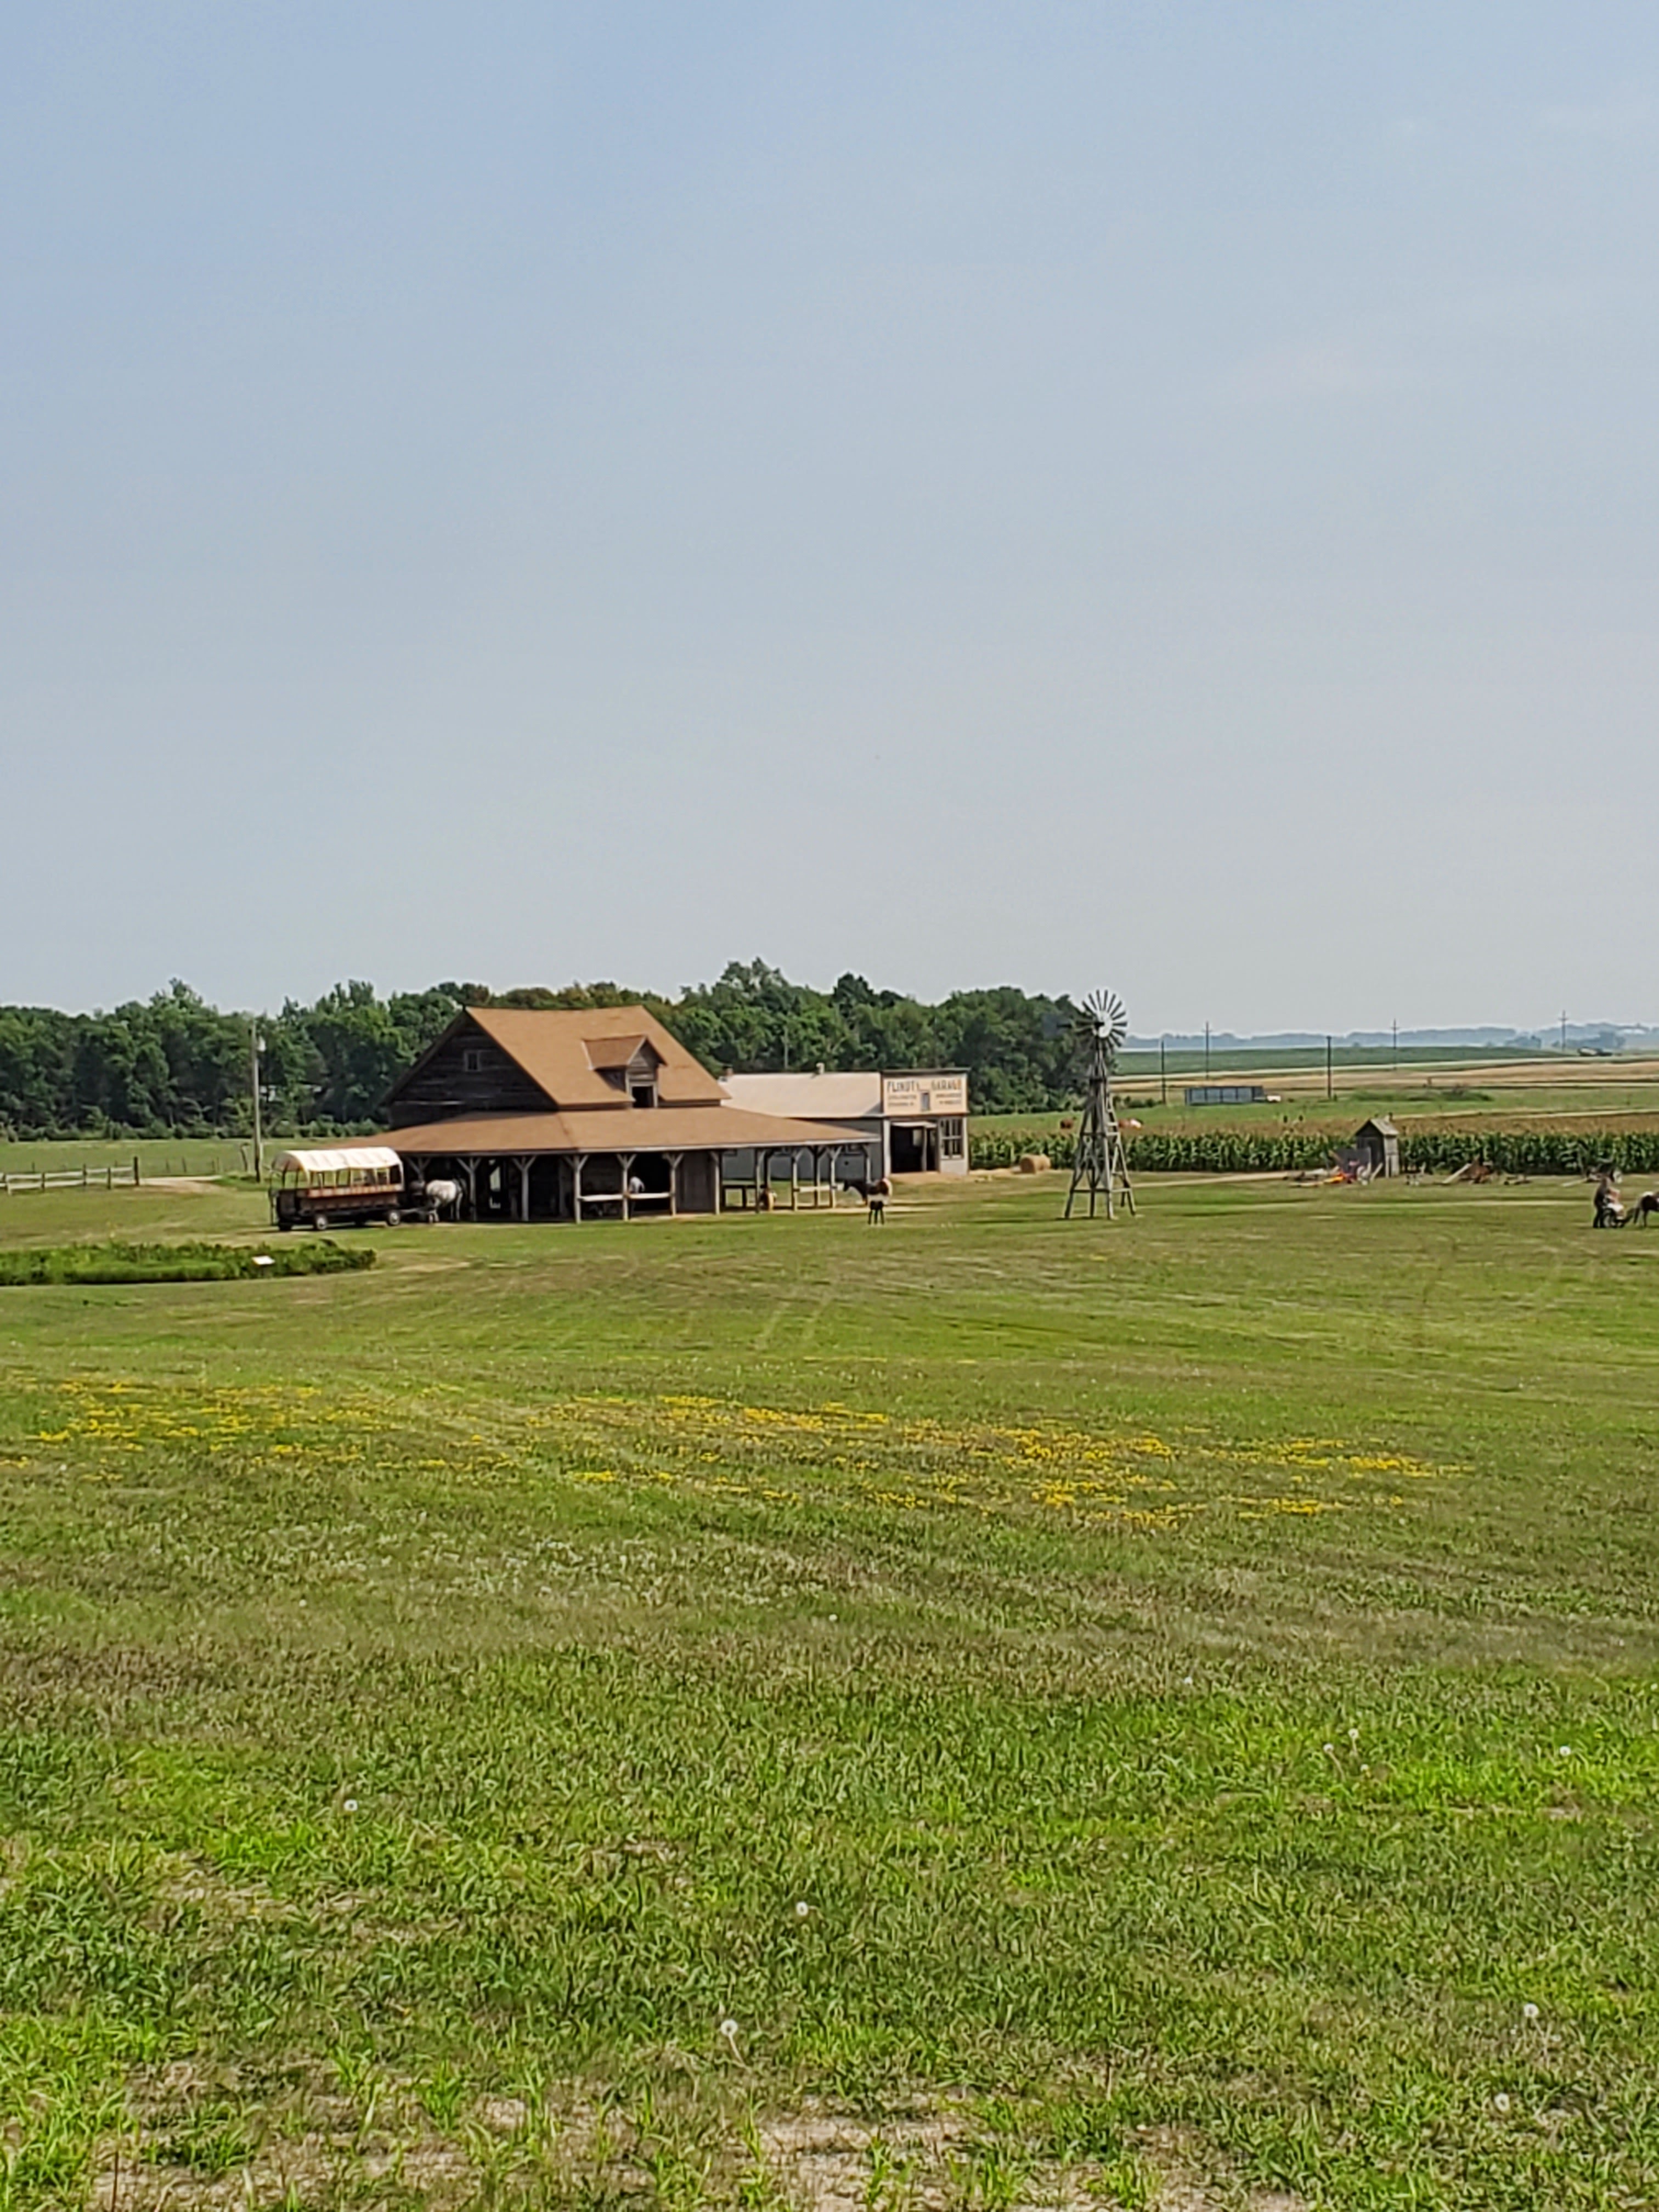 Picture of a place: Ingalls Homestead